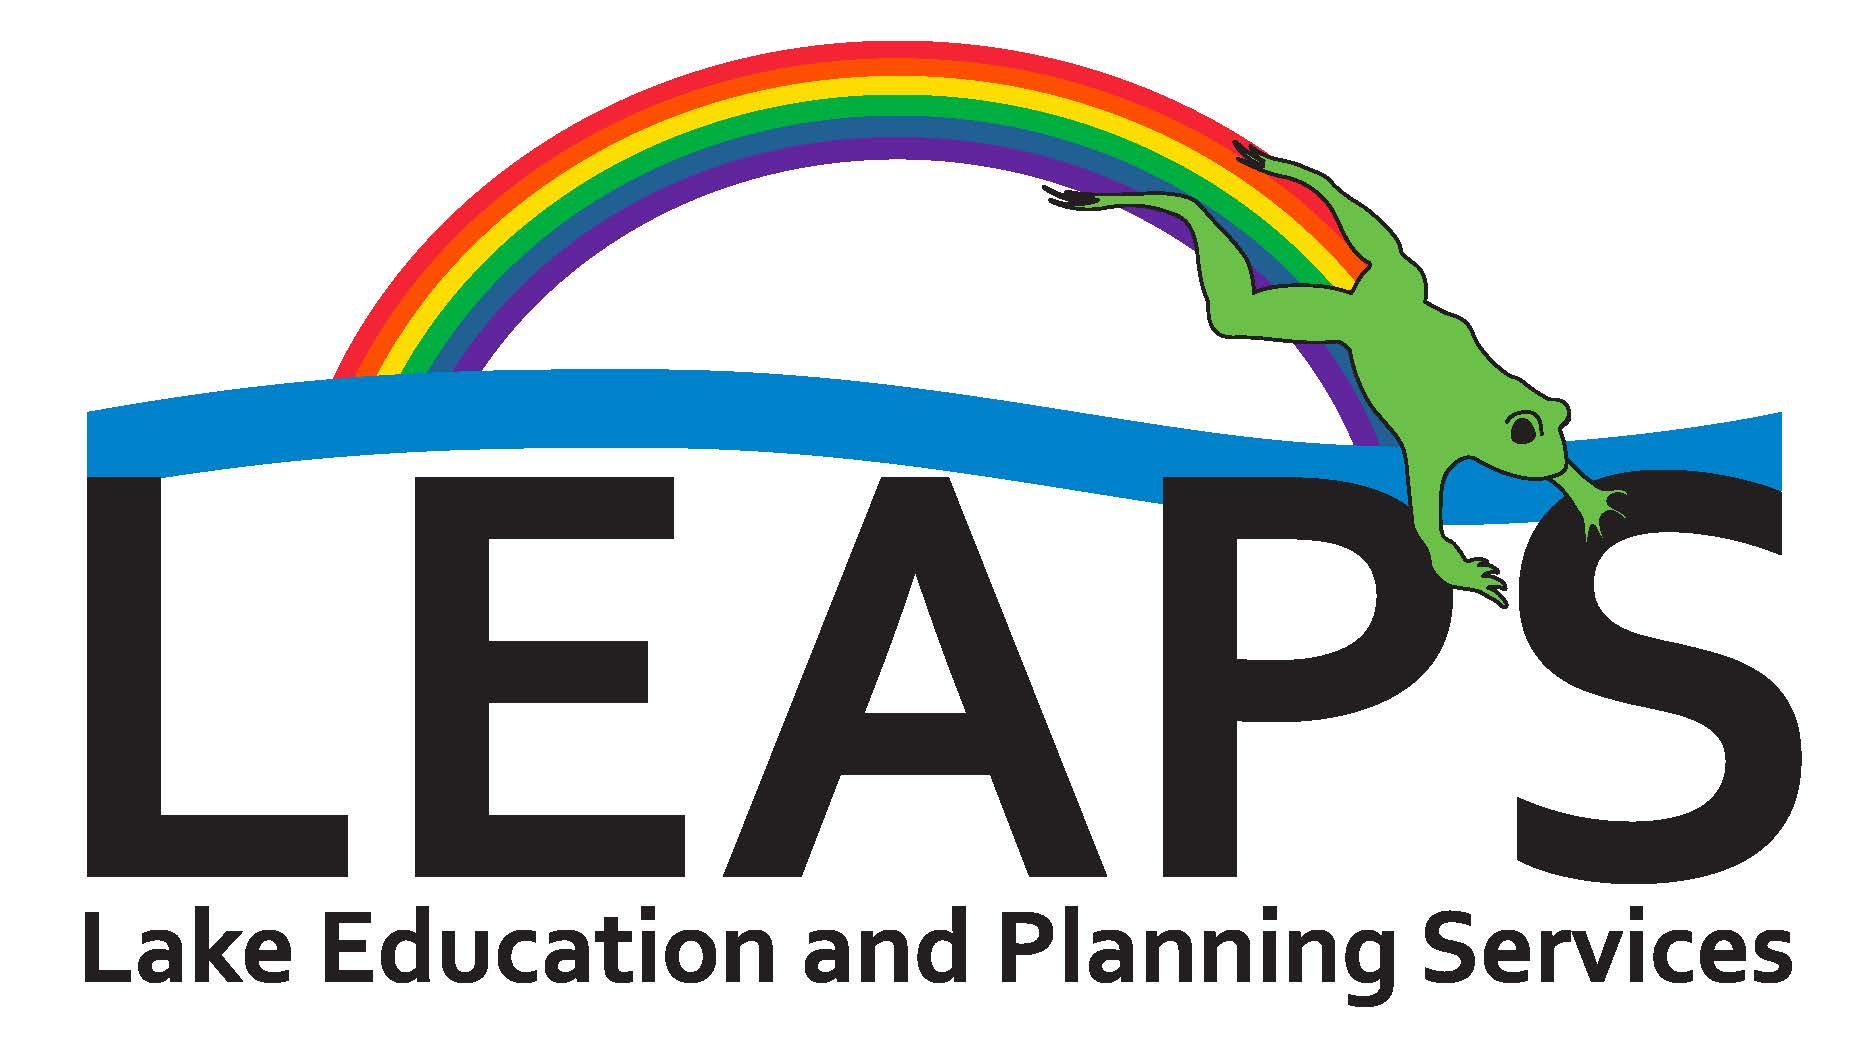 Lake Education and Planning Services, LLC (LEAPS)